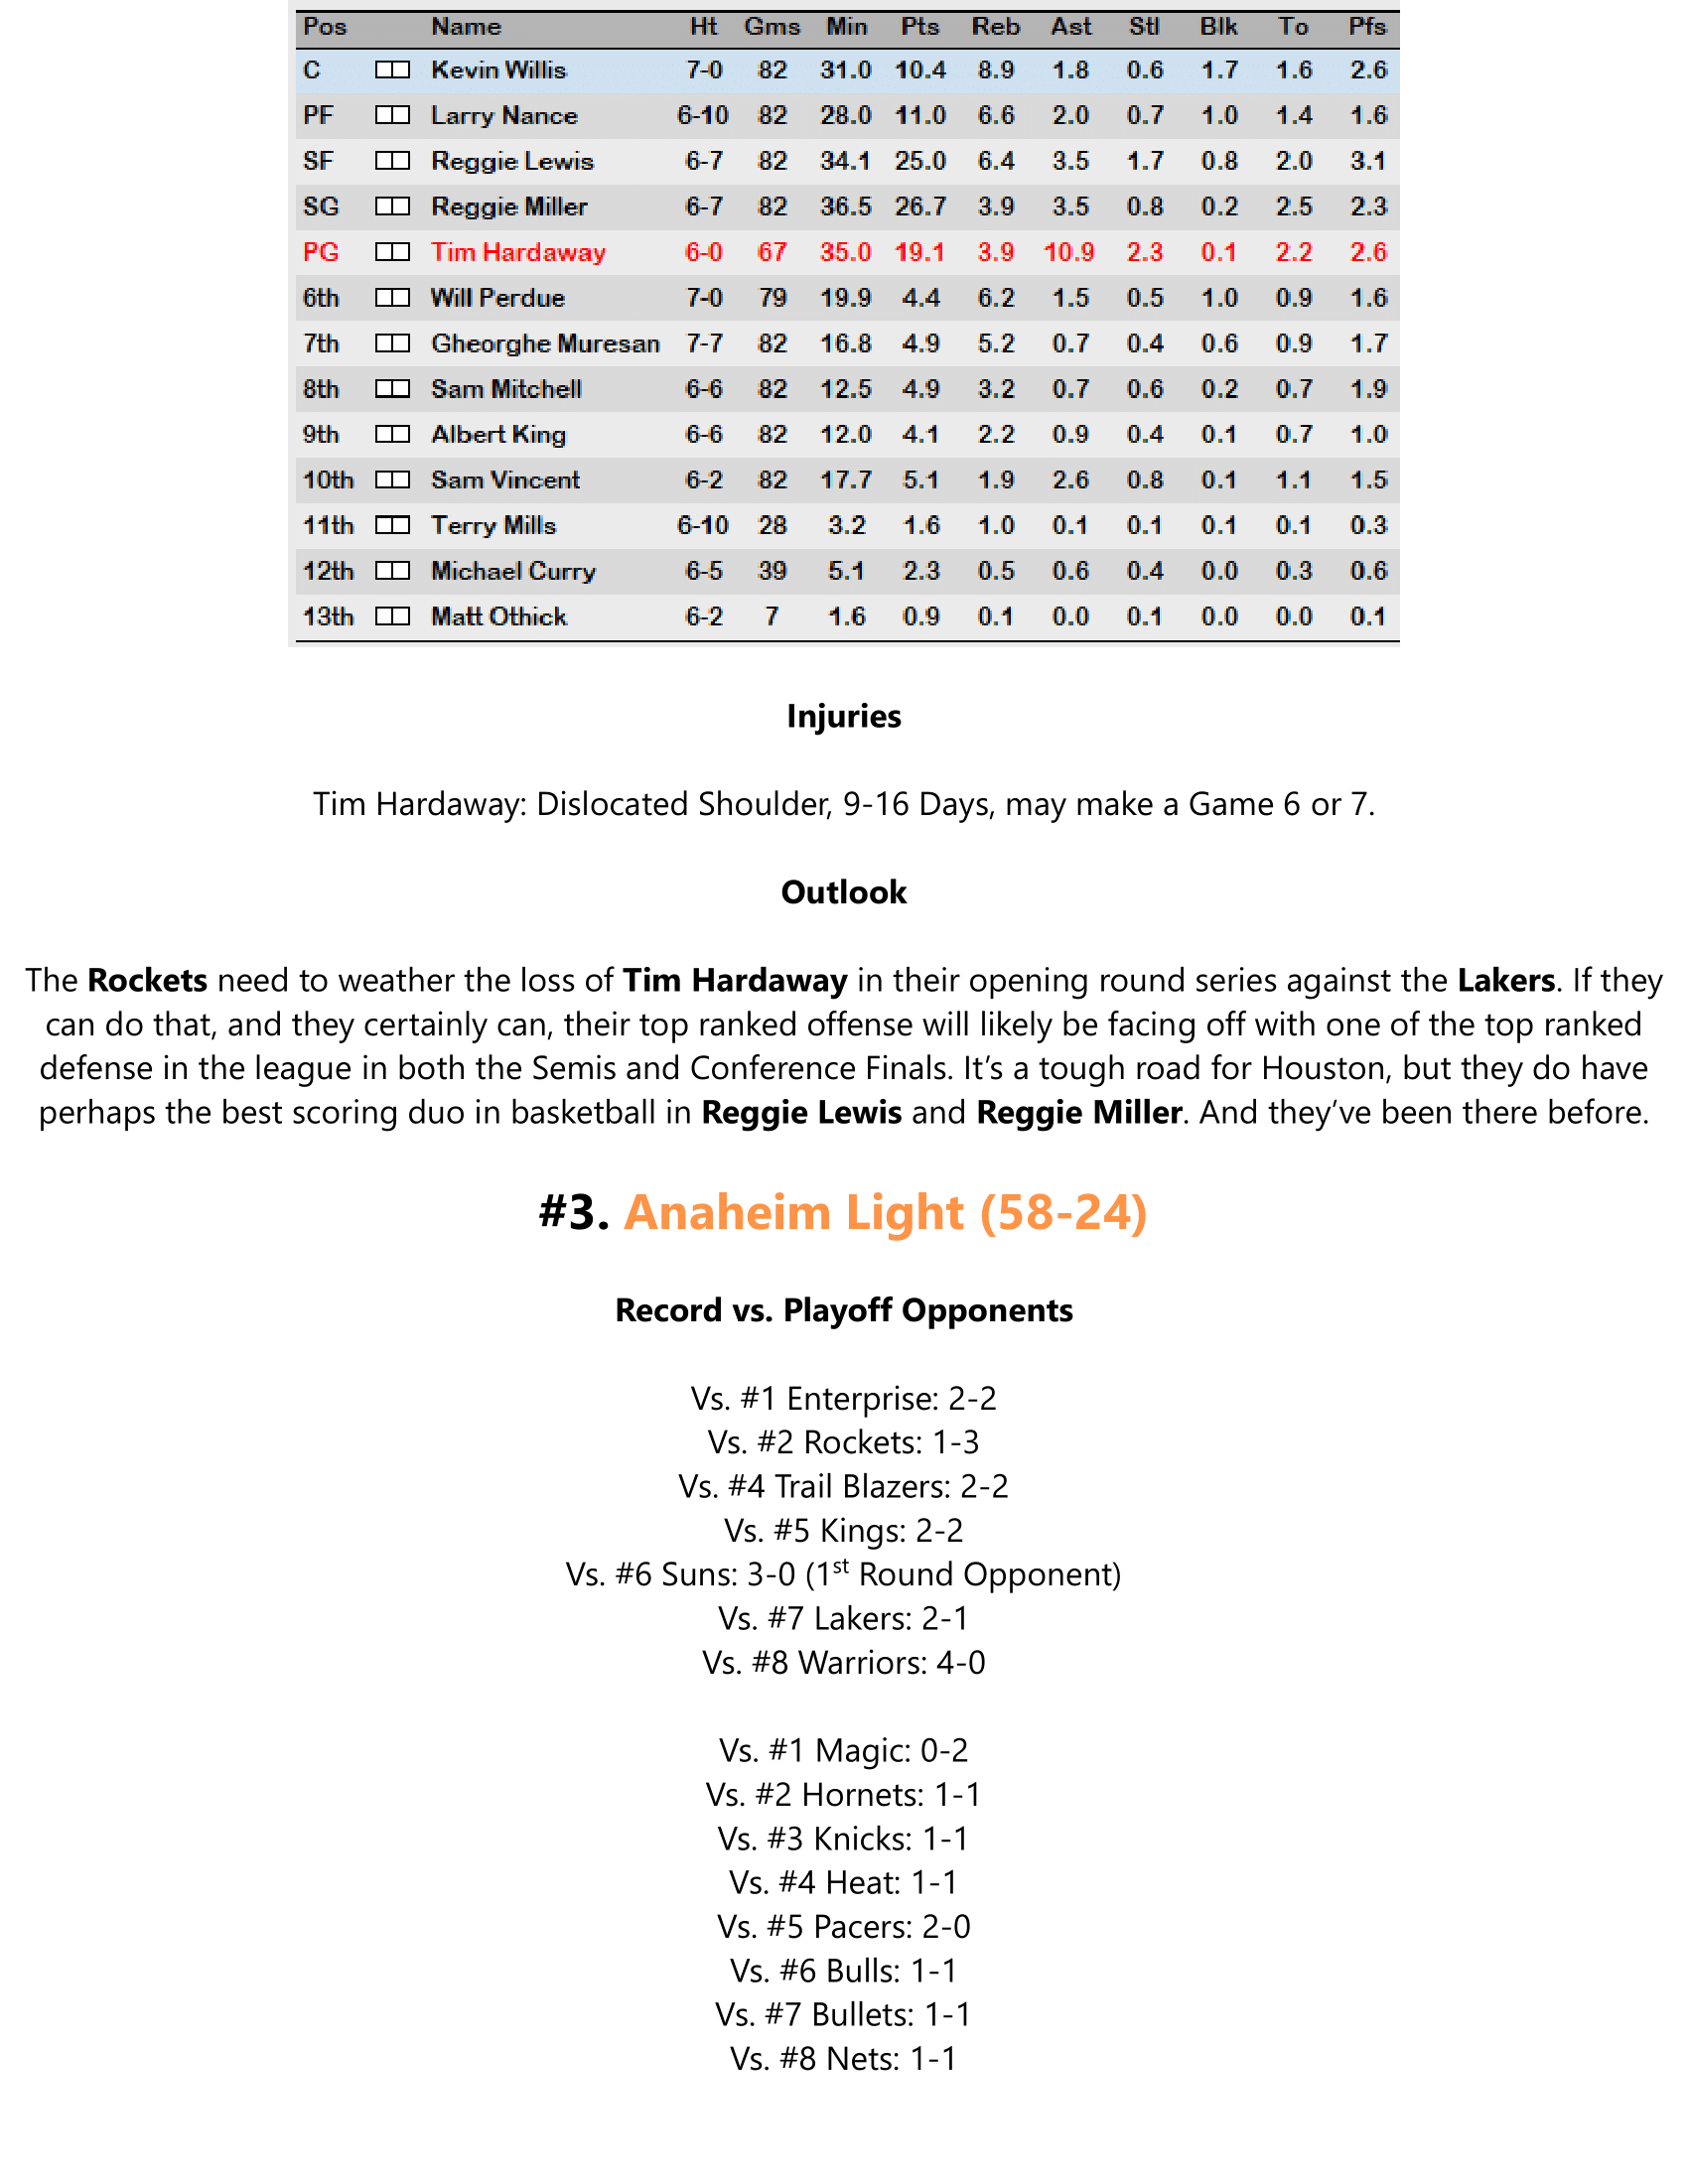 93-94-Part-4-Playoff-Preview-04.png